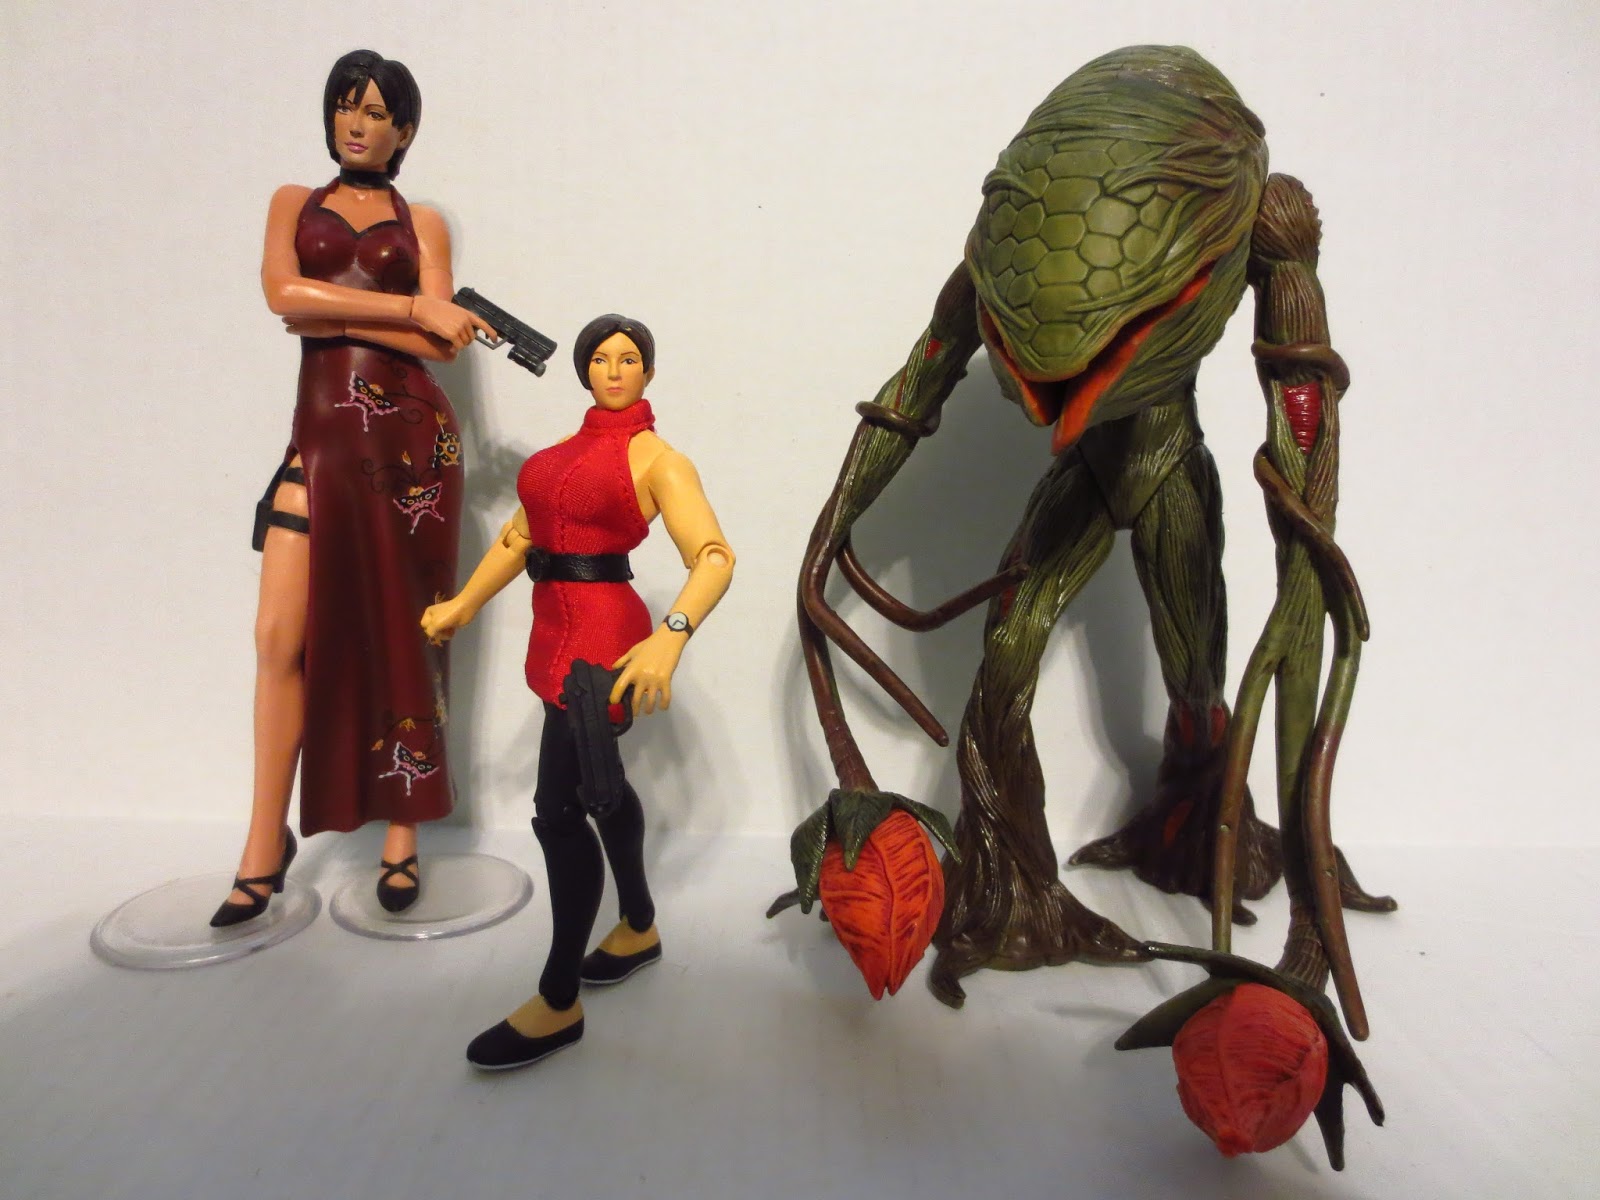 Amazon.com: Resident Evil 2 Platinum > William Birkin with Sherry Action Figure 2-Pack: Toys & Games